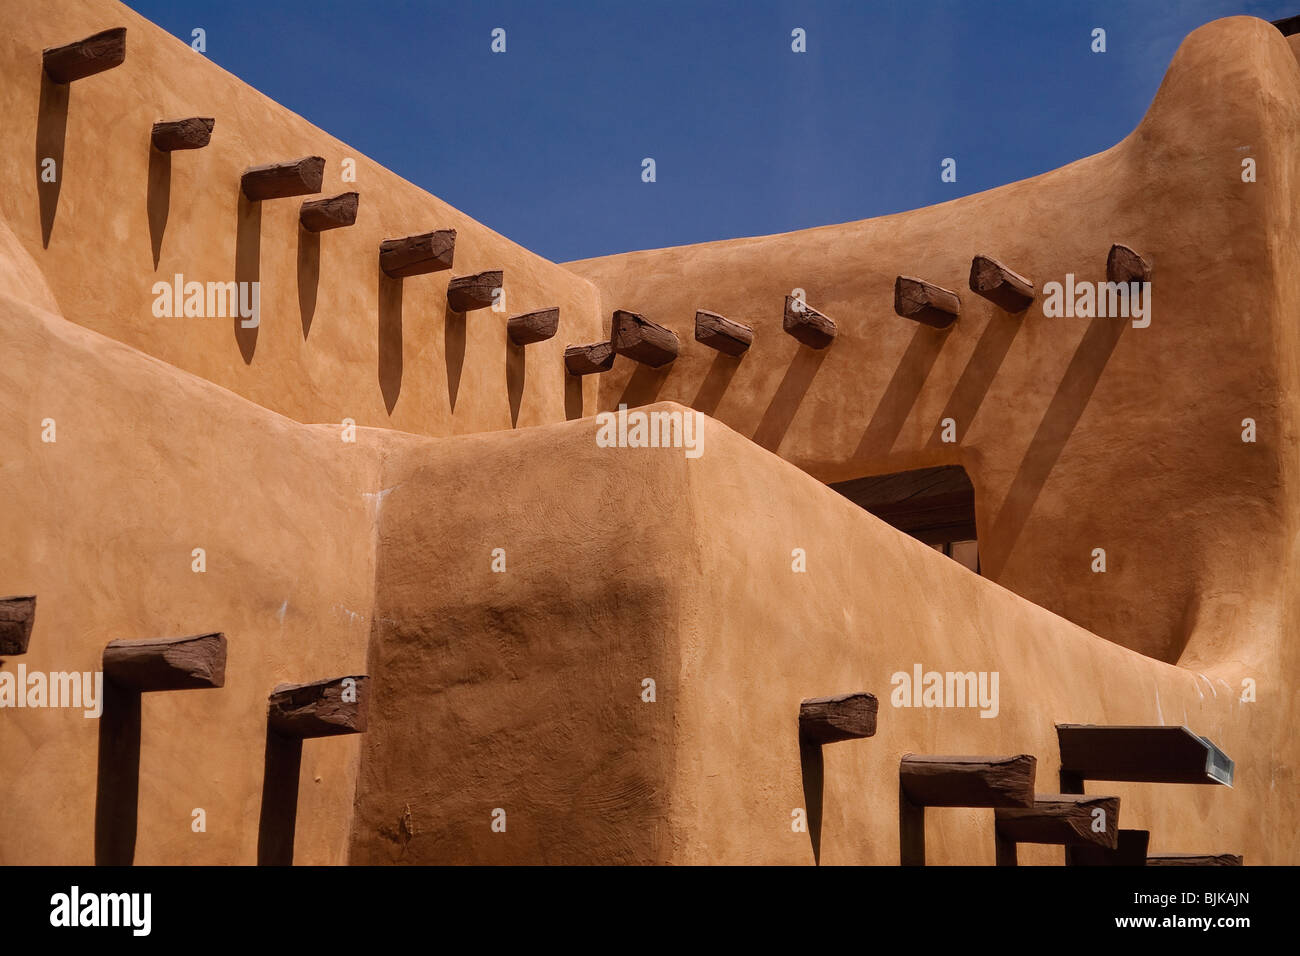 Detail view of the adobe walls of the Santa Fe Museum of Fine Arts, with exposed wooden beams, contrasting against the blue sky Stock Photo